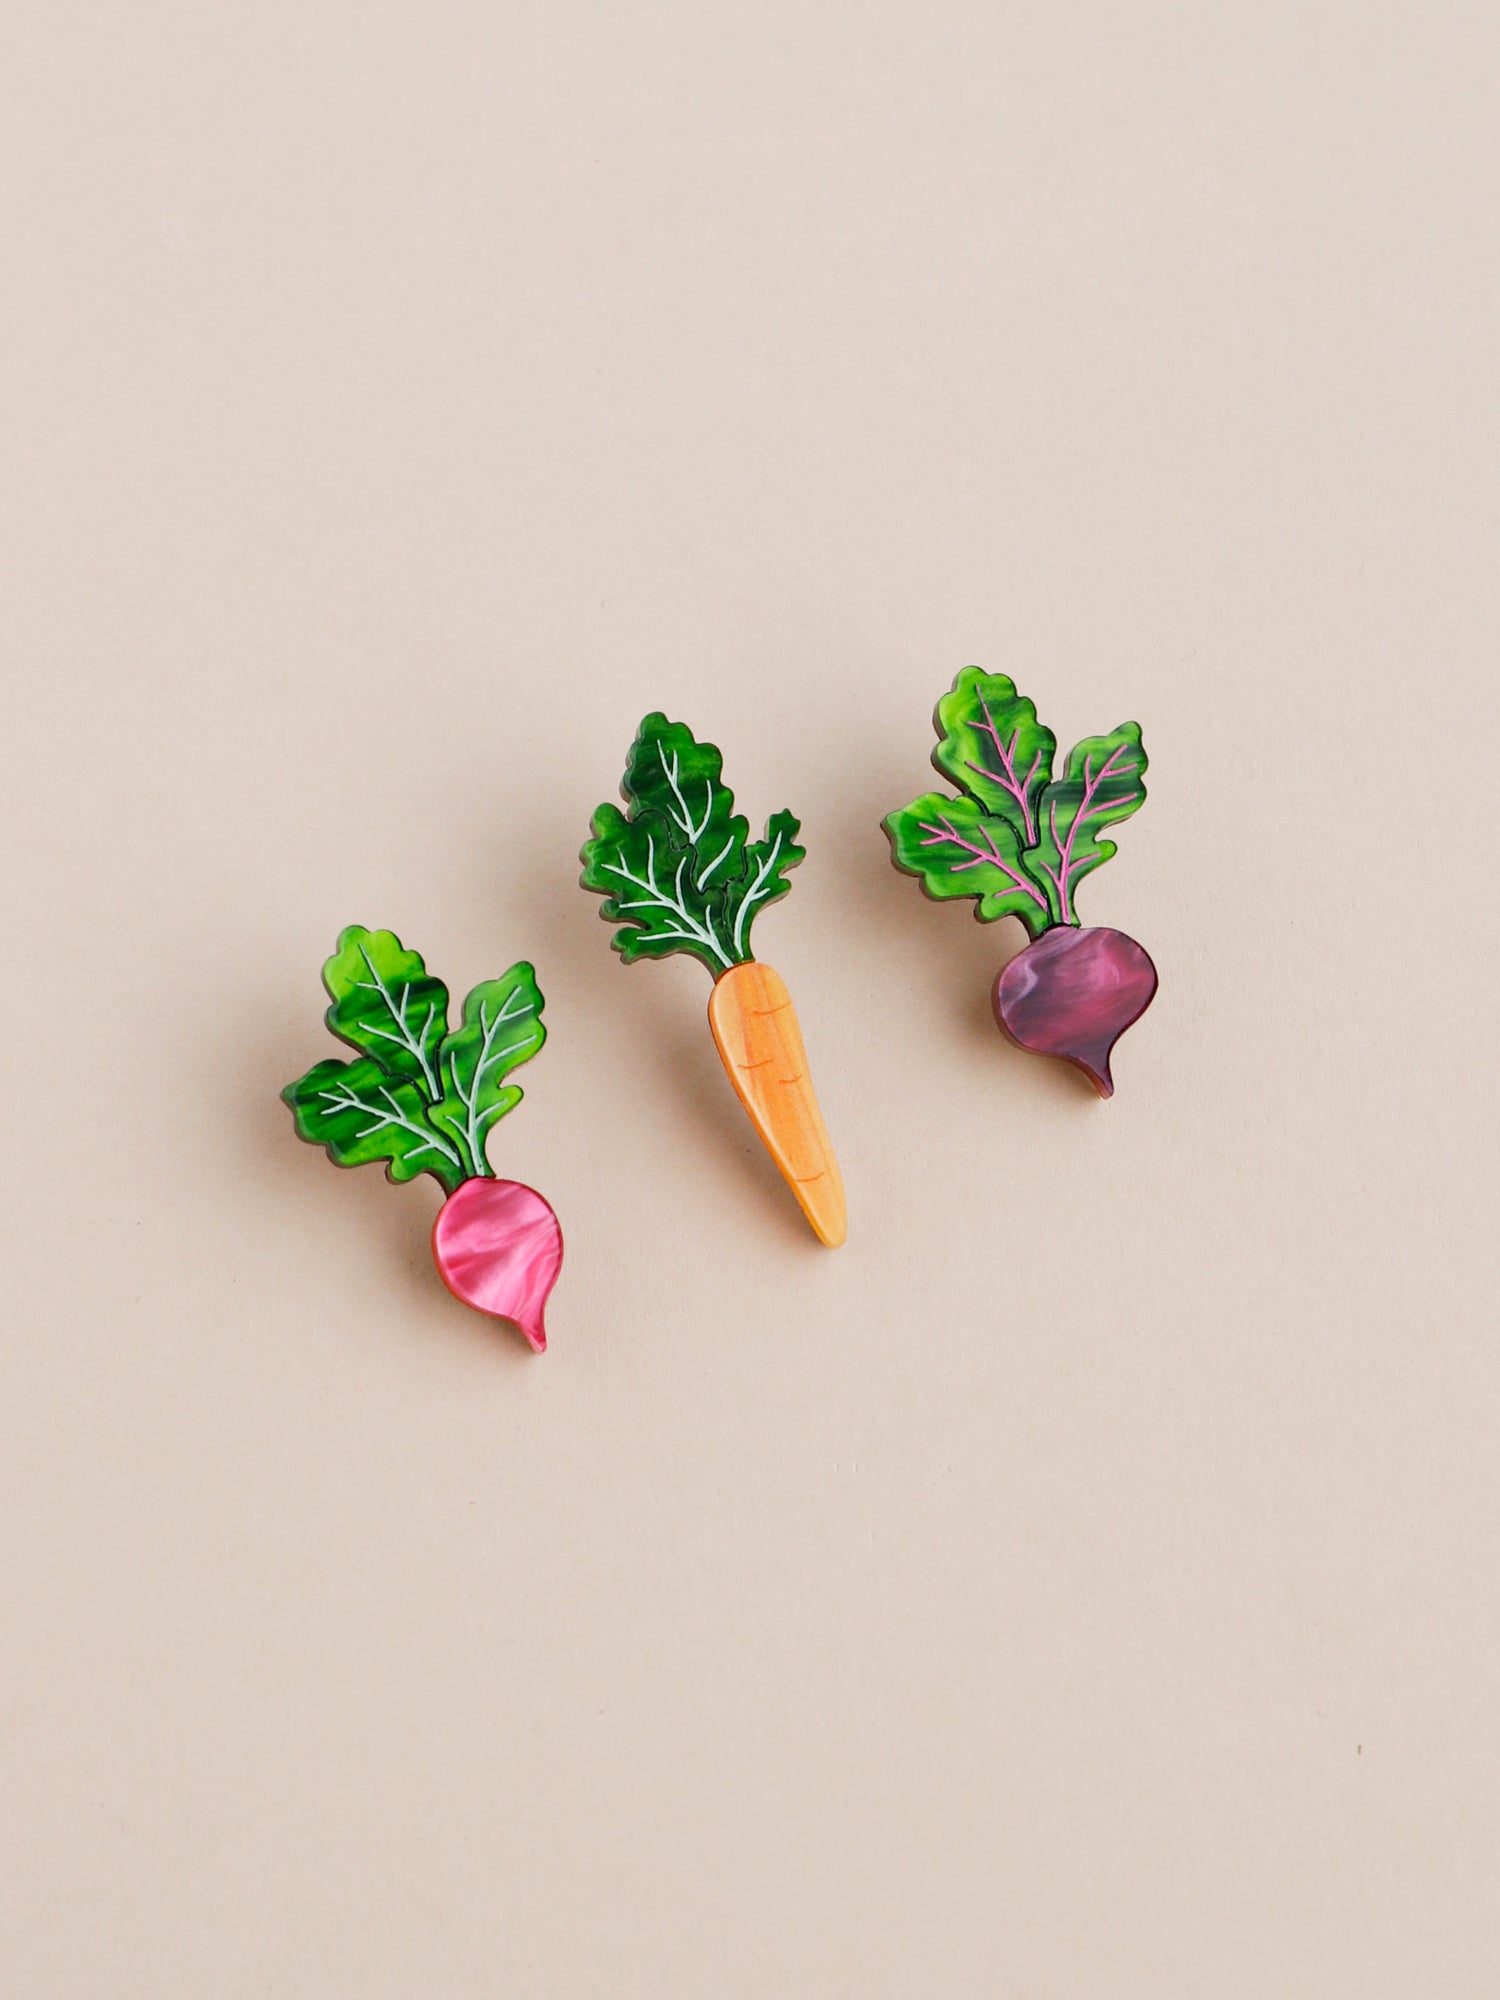 Pin set including our mini carrot, beetroot and radish vegetables. Made with acrylic and our FSC approved wood backing. 1 x silver tone brooch pin & locking clasps. Handmade in London by Wolf & Moon.